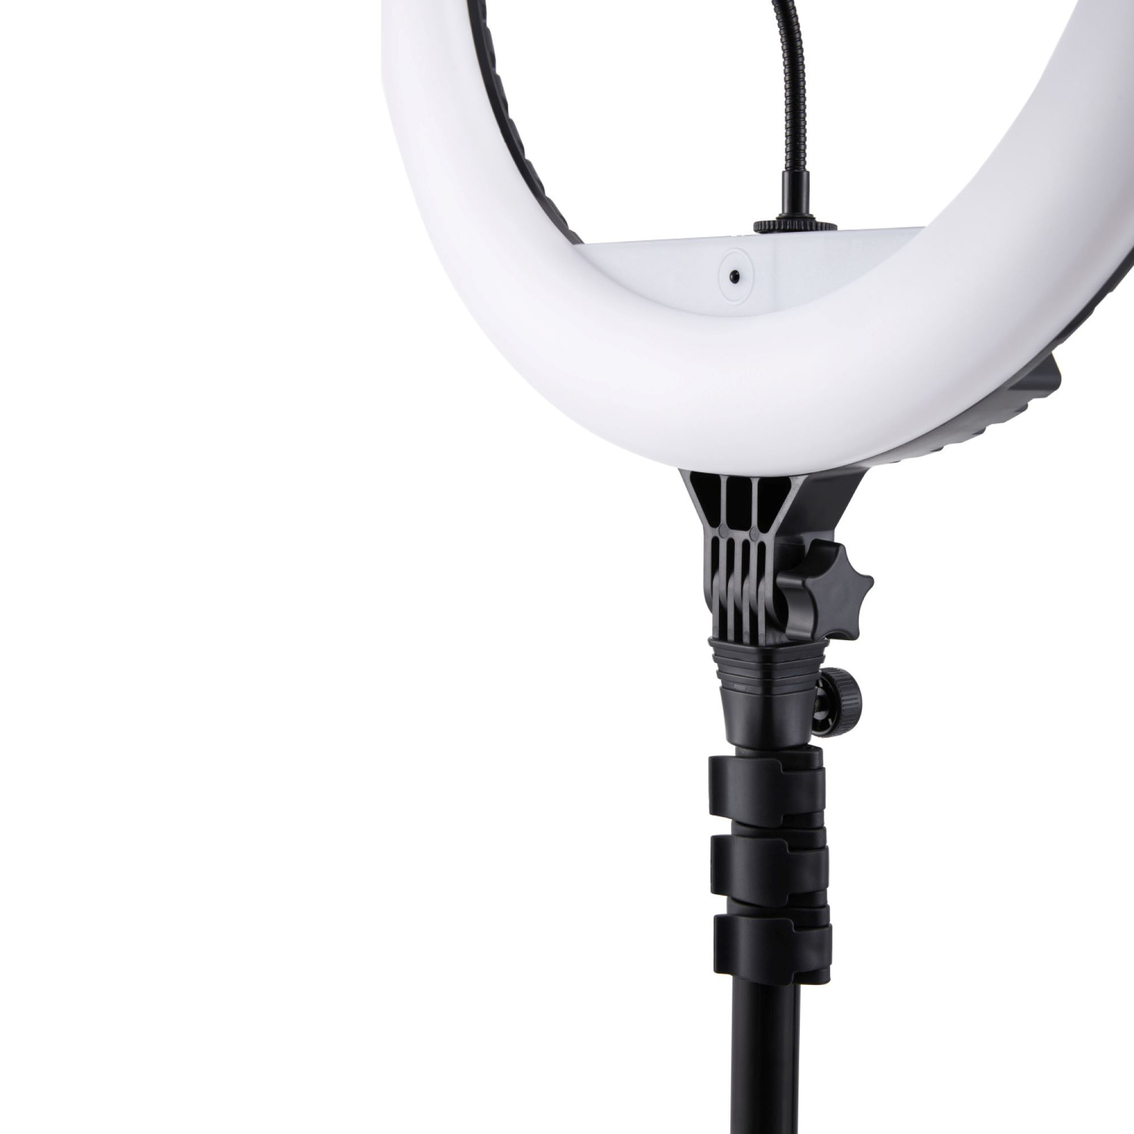 Vivitar 18 in. Ring Light Video Light Kit with 63 in. Stand and Remote - Image 9 of 10